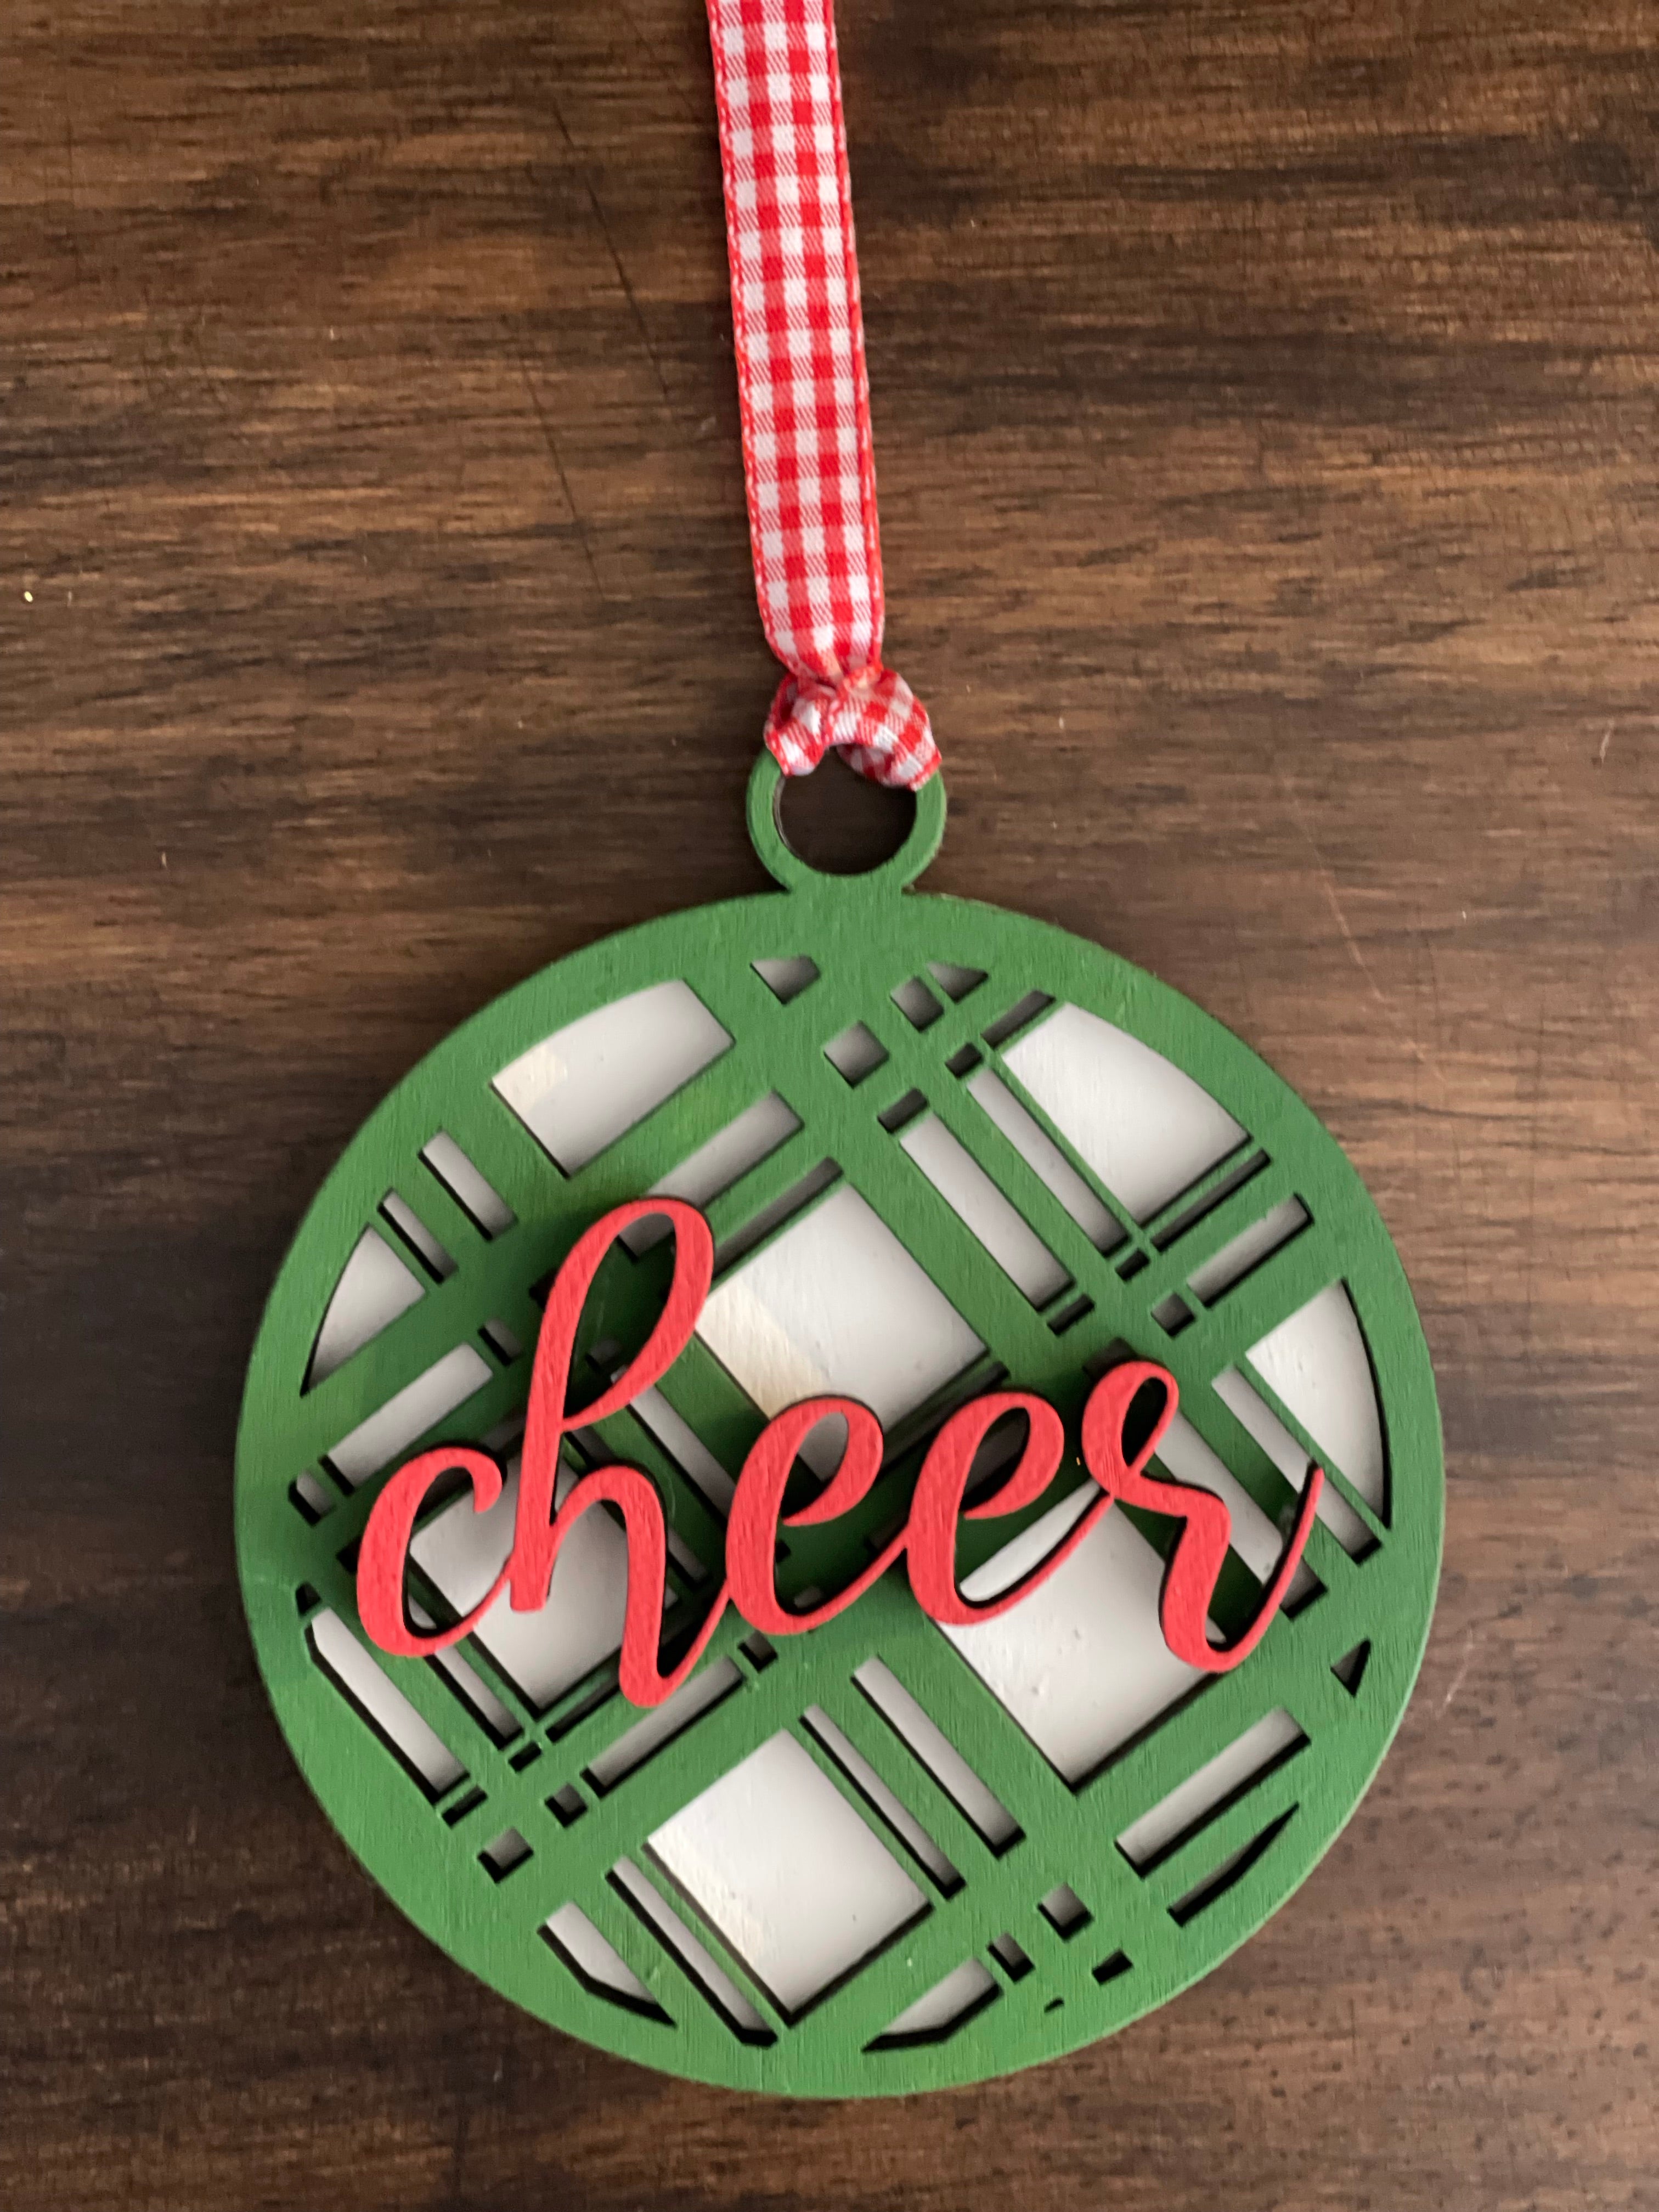 This is the cheer green plaid ornament without a twine bow.